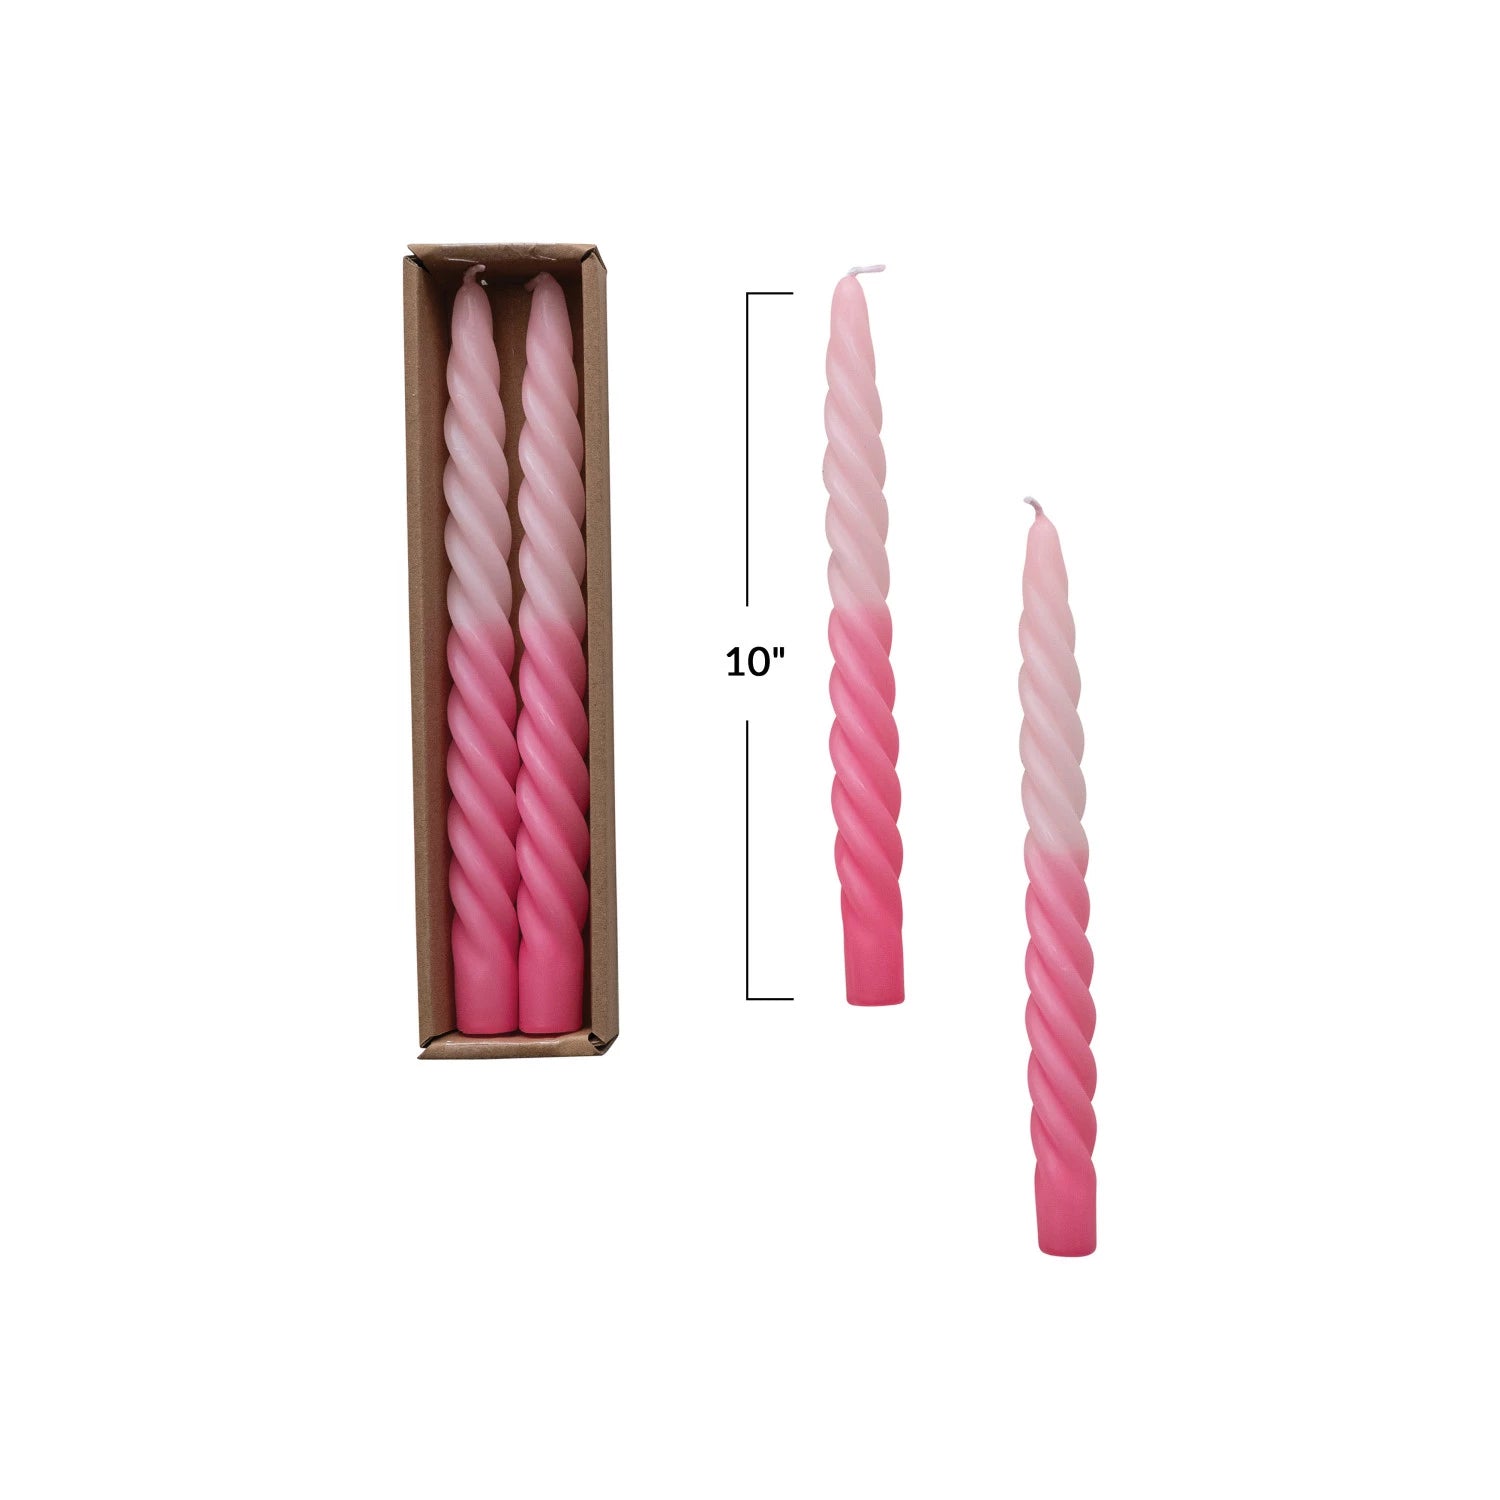 Unscented Twisted Taper Candles, Pink Ombre, Set of 2